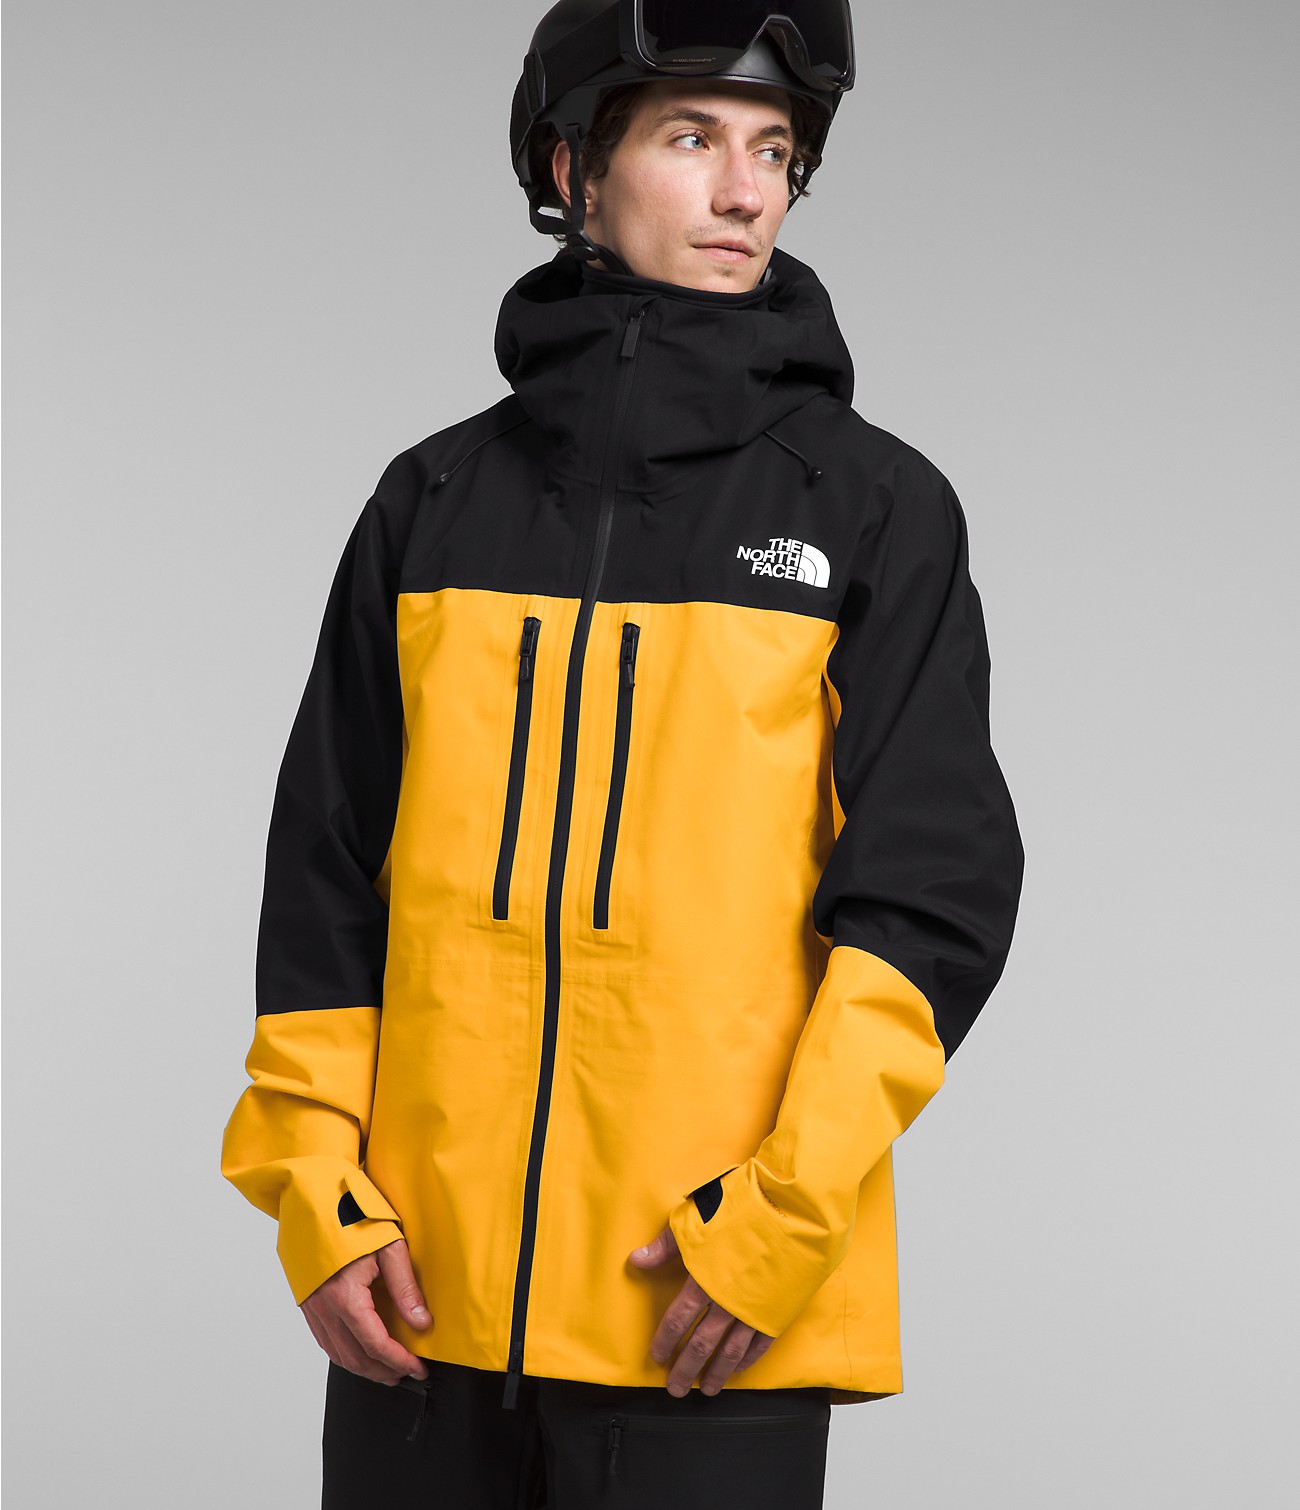 Men’s Ceptor Jacket | The North Face